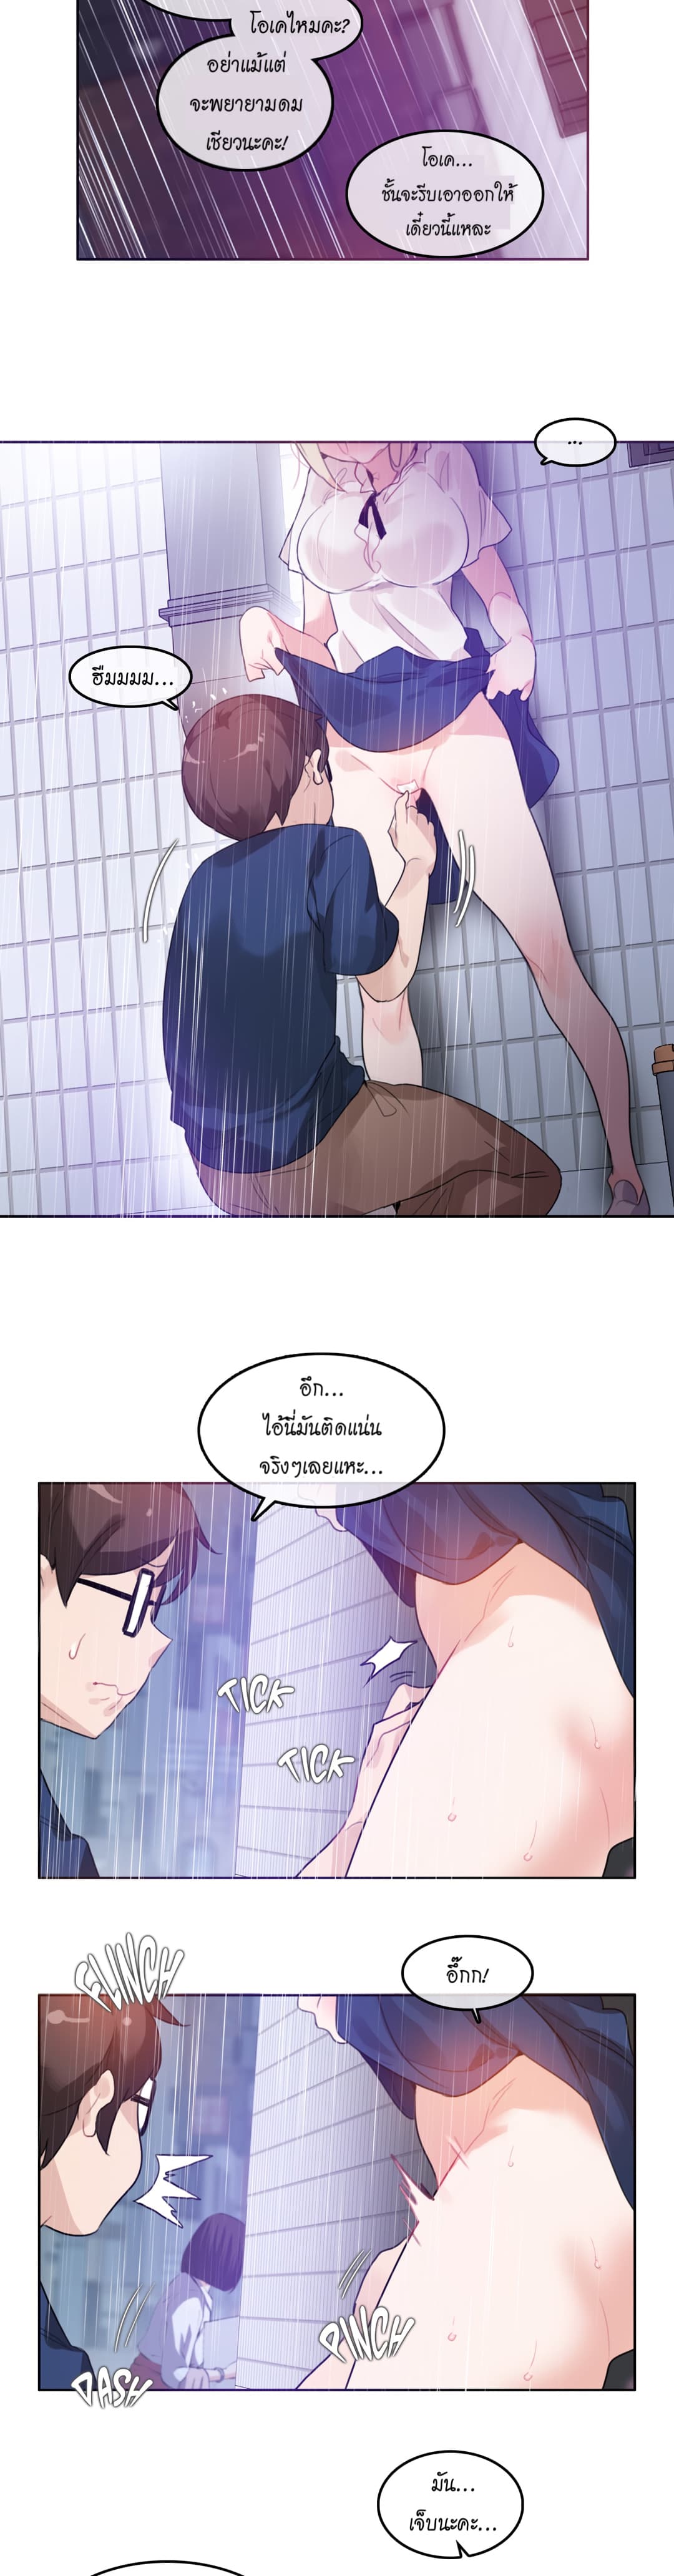 A Pervert’s Daily Life 36 (9)